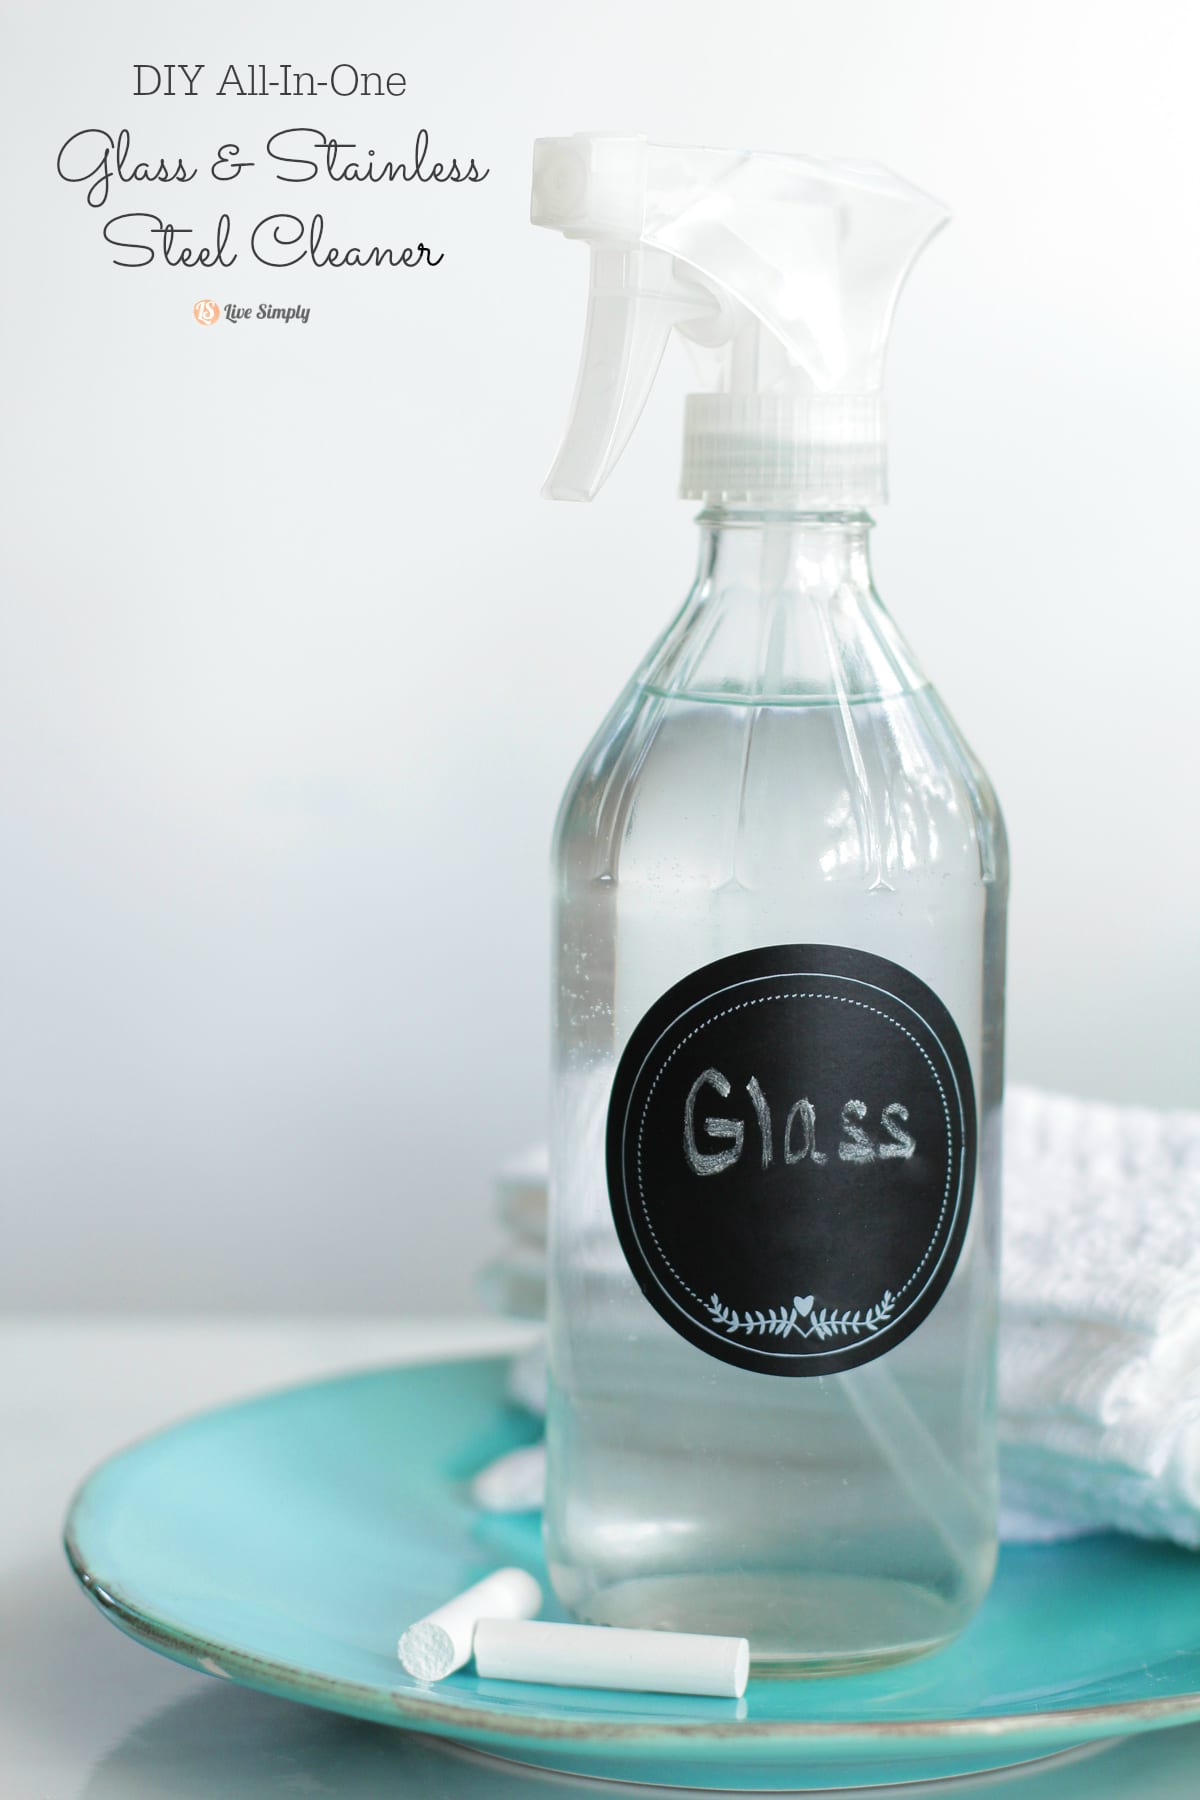 DIY All-In-One Glass and Stainless Steel Cleaner